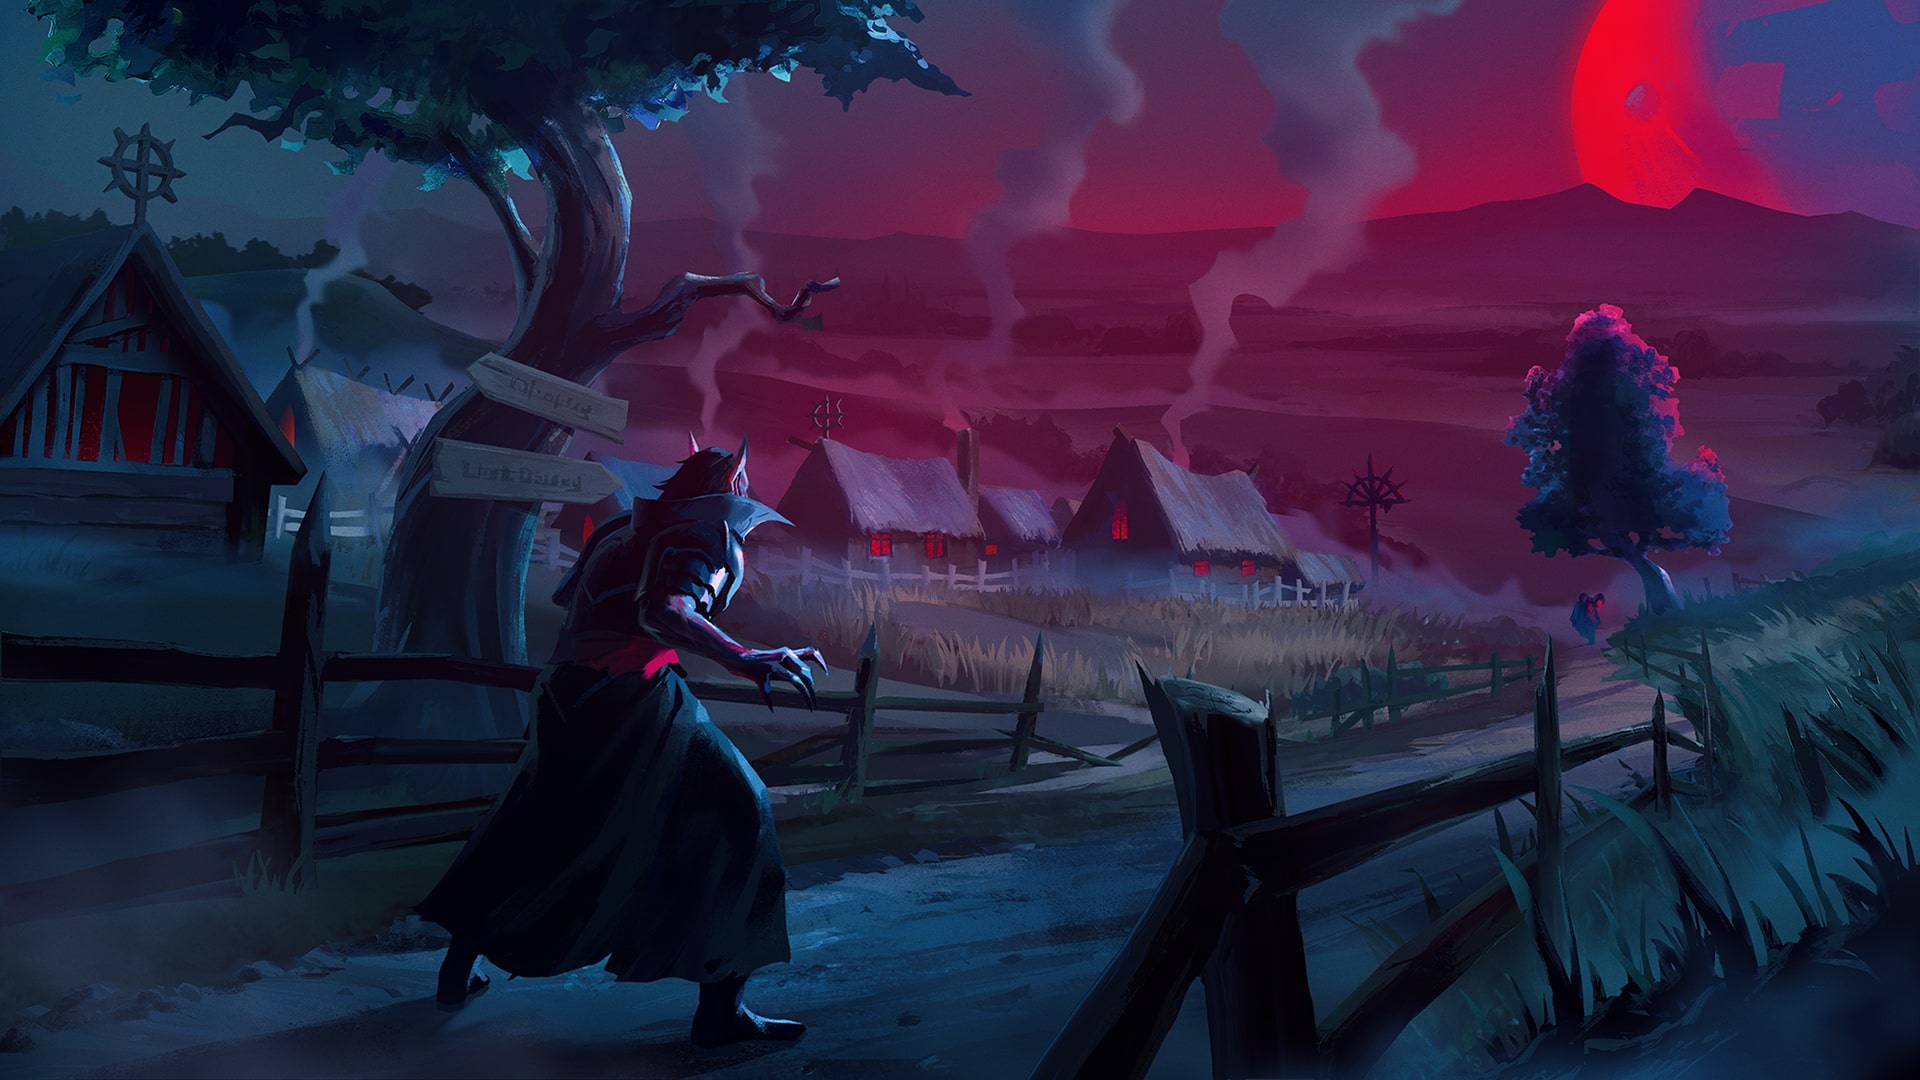 A vampire looks over a small village with a deep red sky.